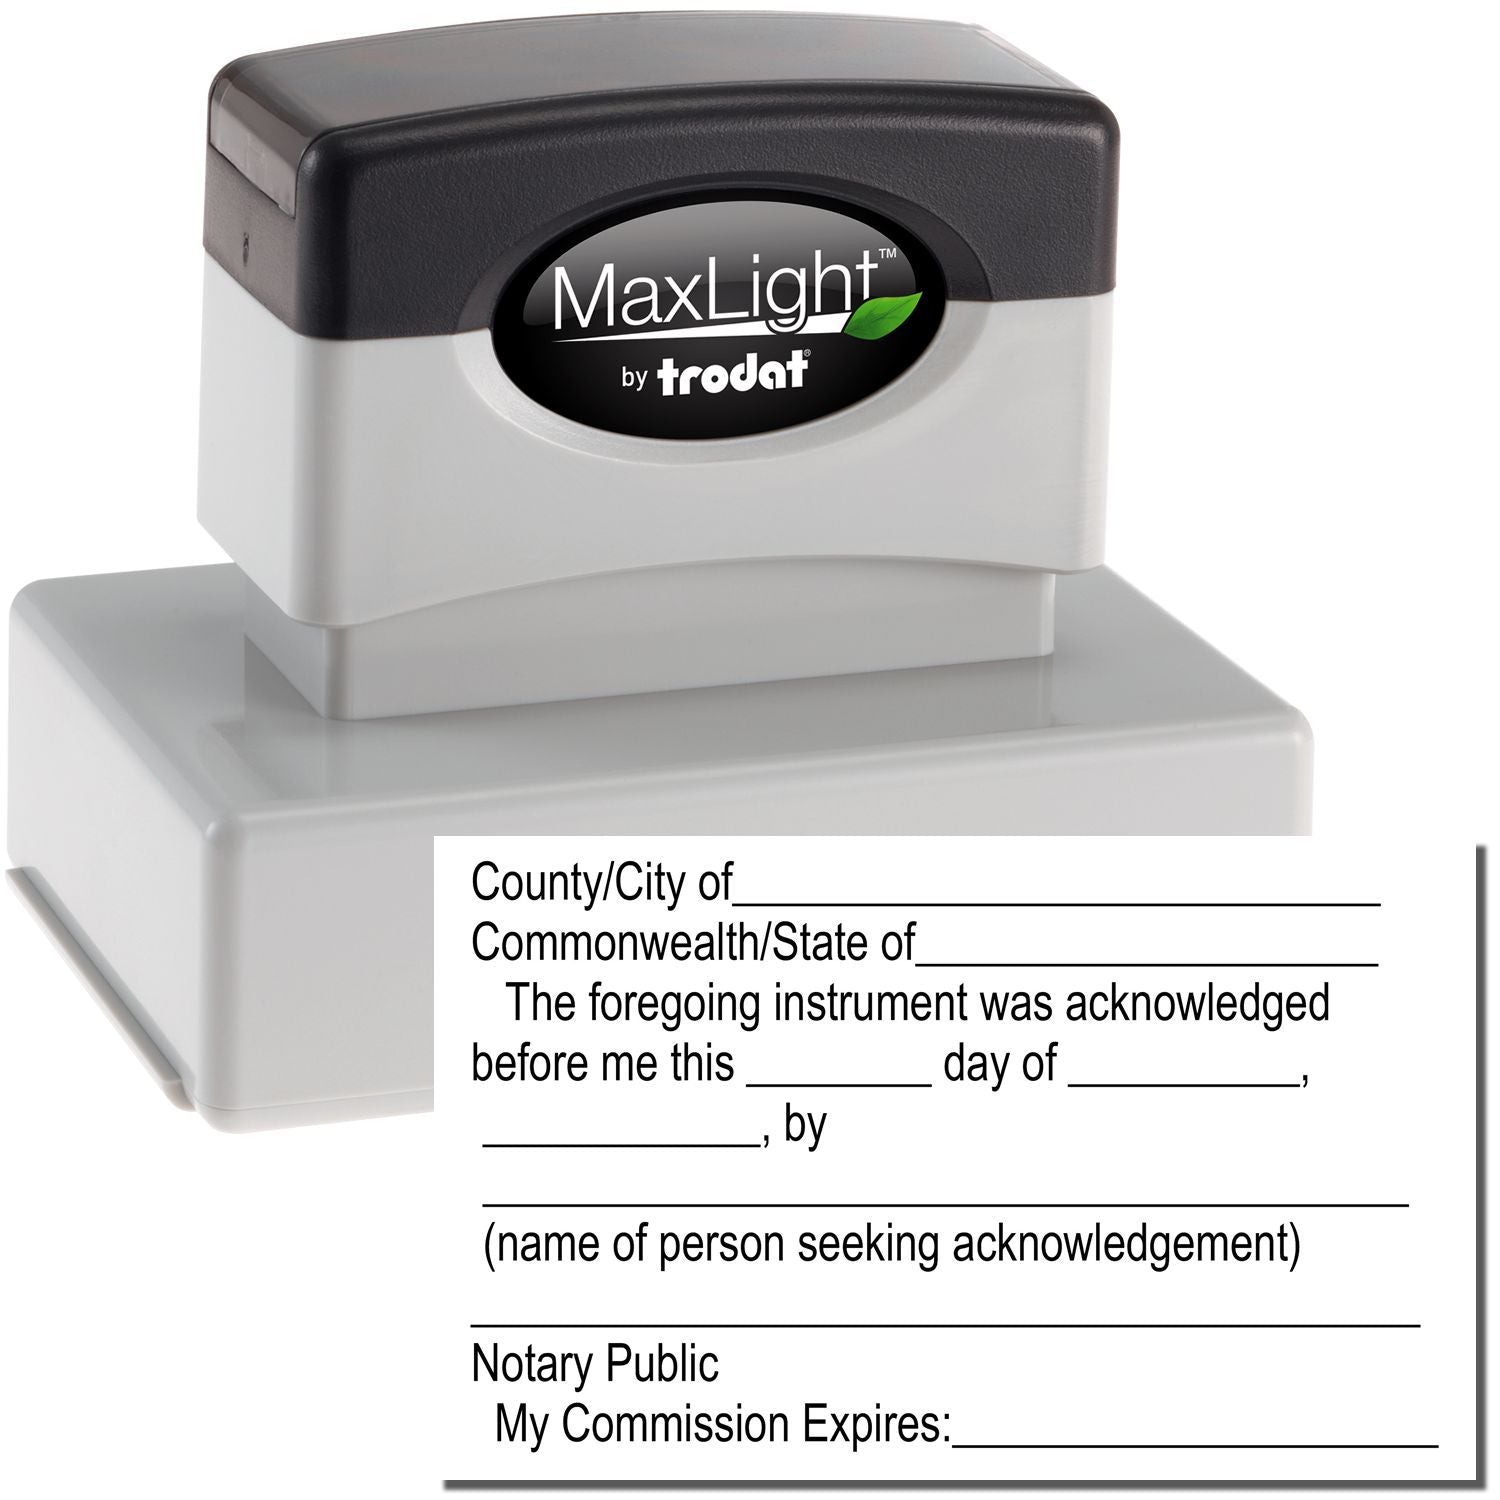 MaxLight Pre-Inked Acknowledgment Notary Stamp Main Image